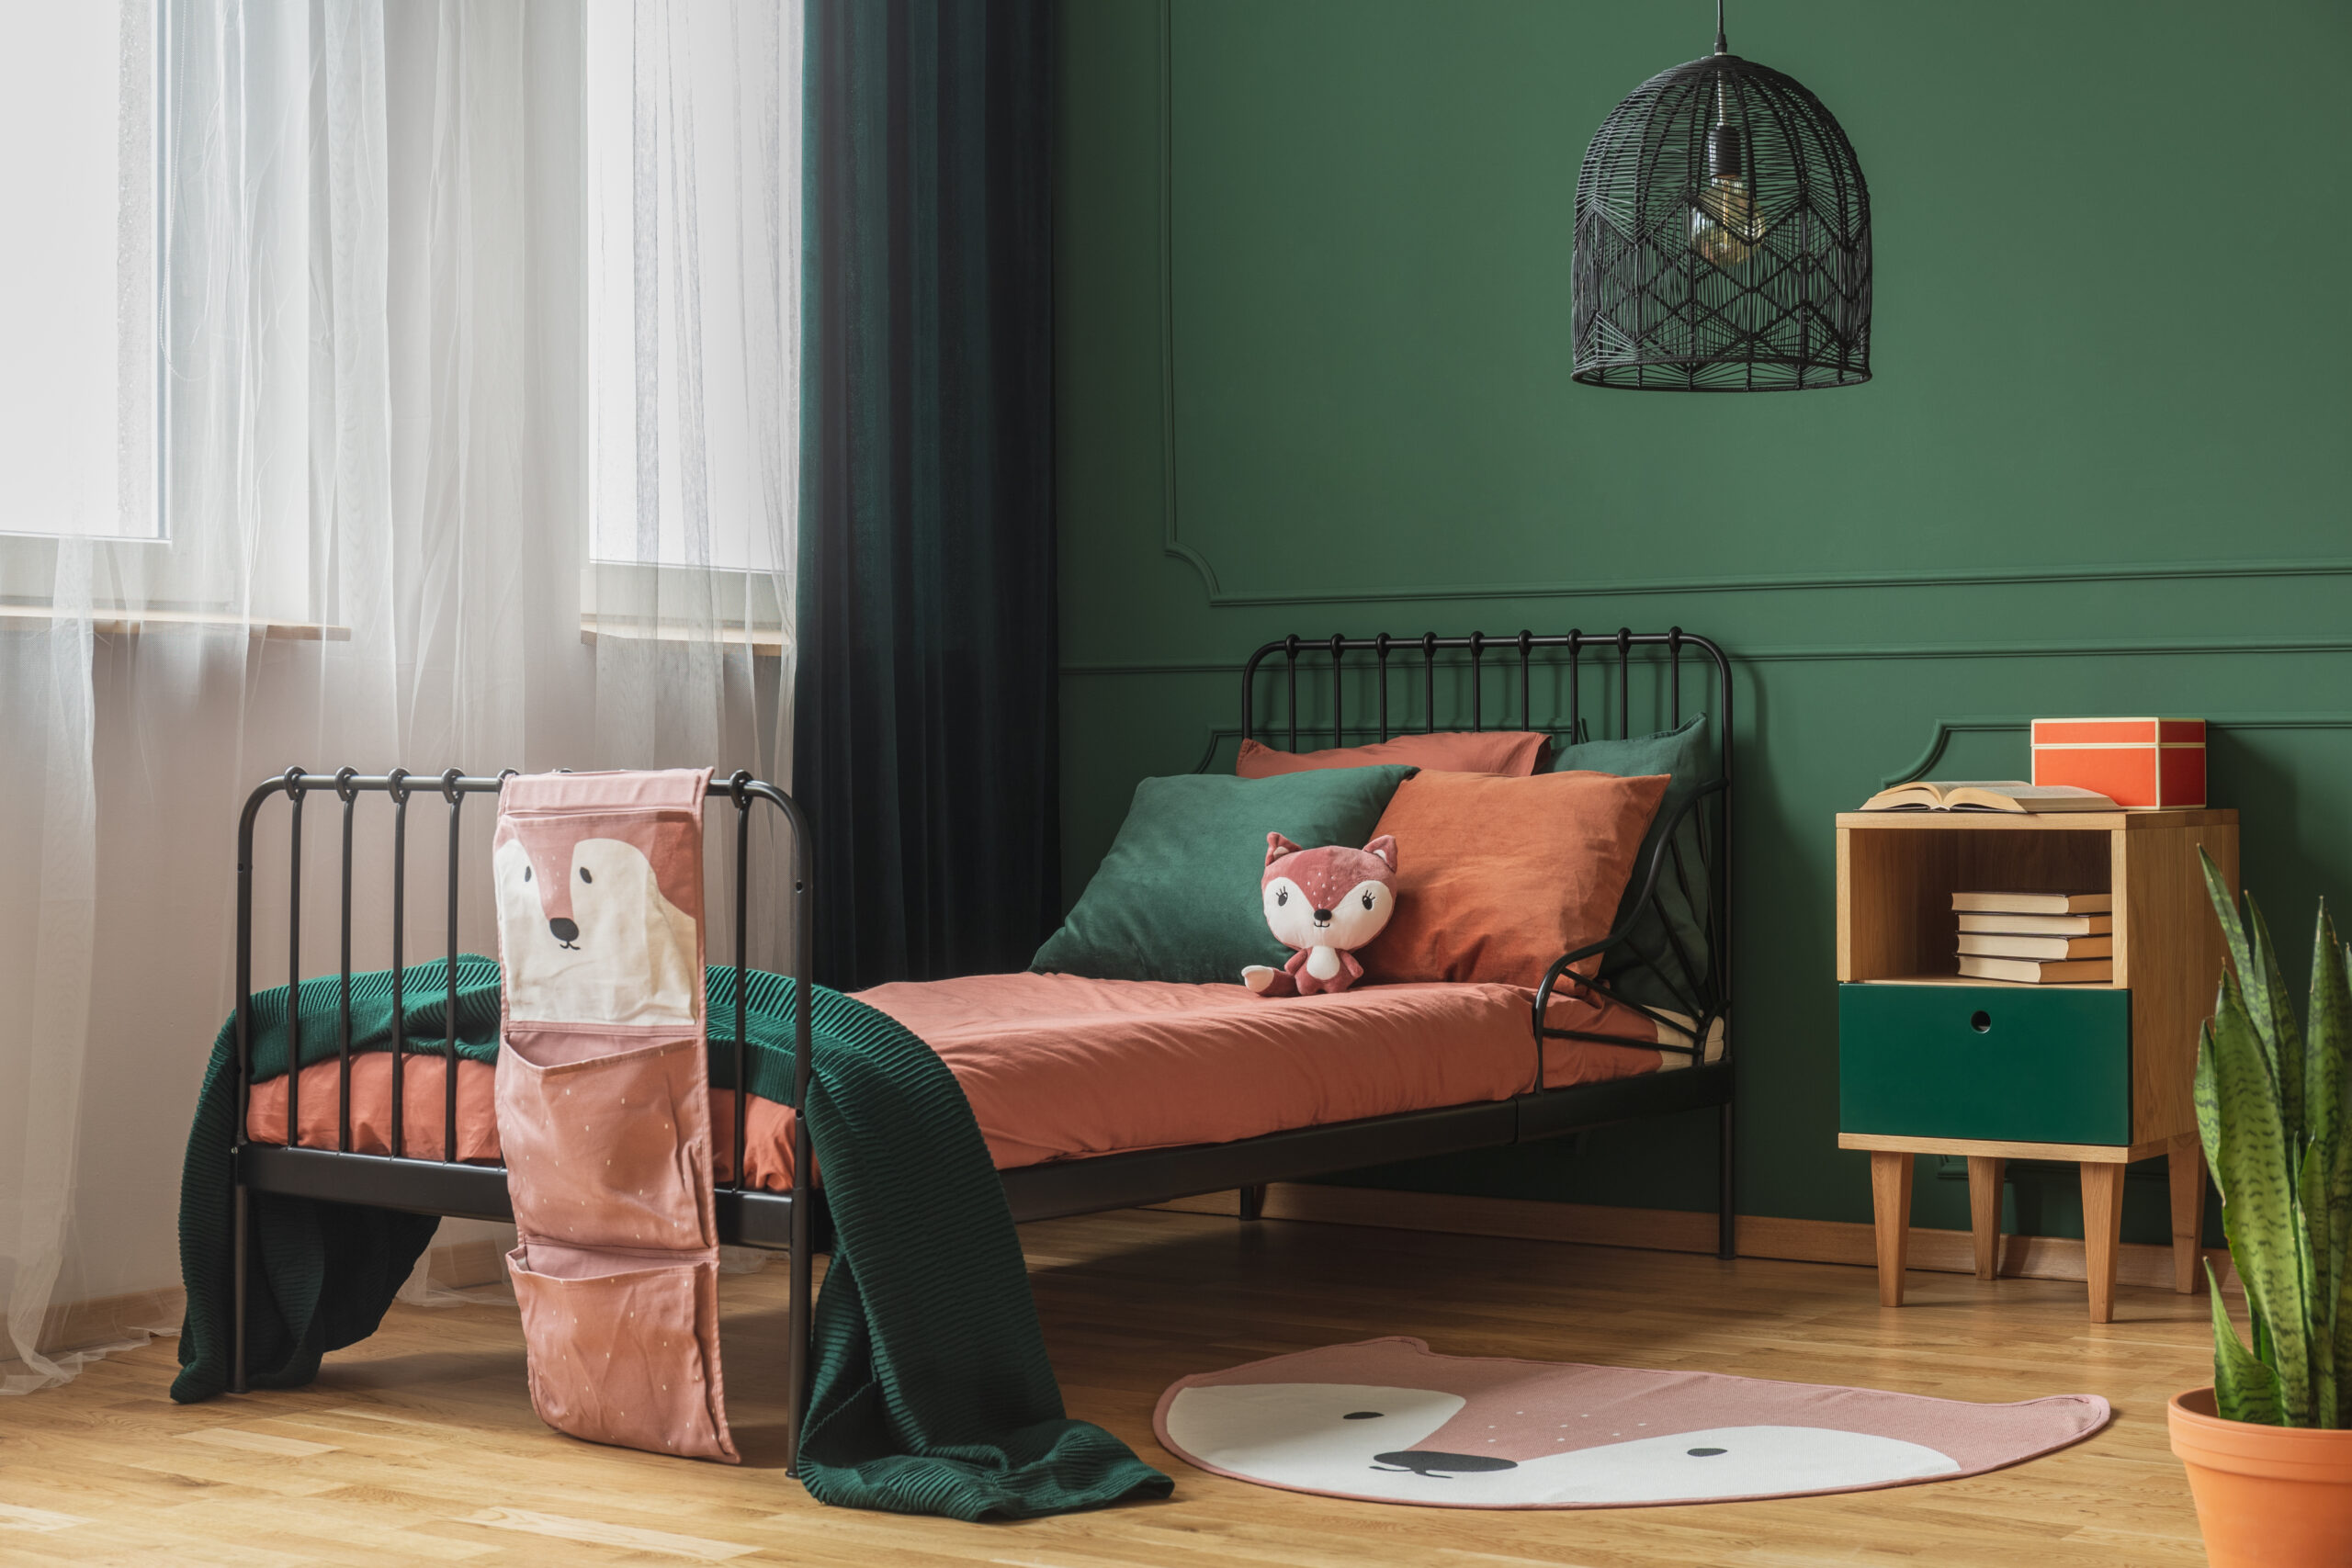 Real photo of a rug shaped like a fox on the wooden floor of a child's bedroom interior with orange sheets and pillows on a black bed standing next to the window